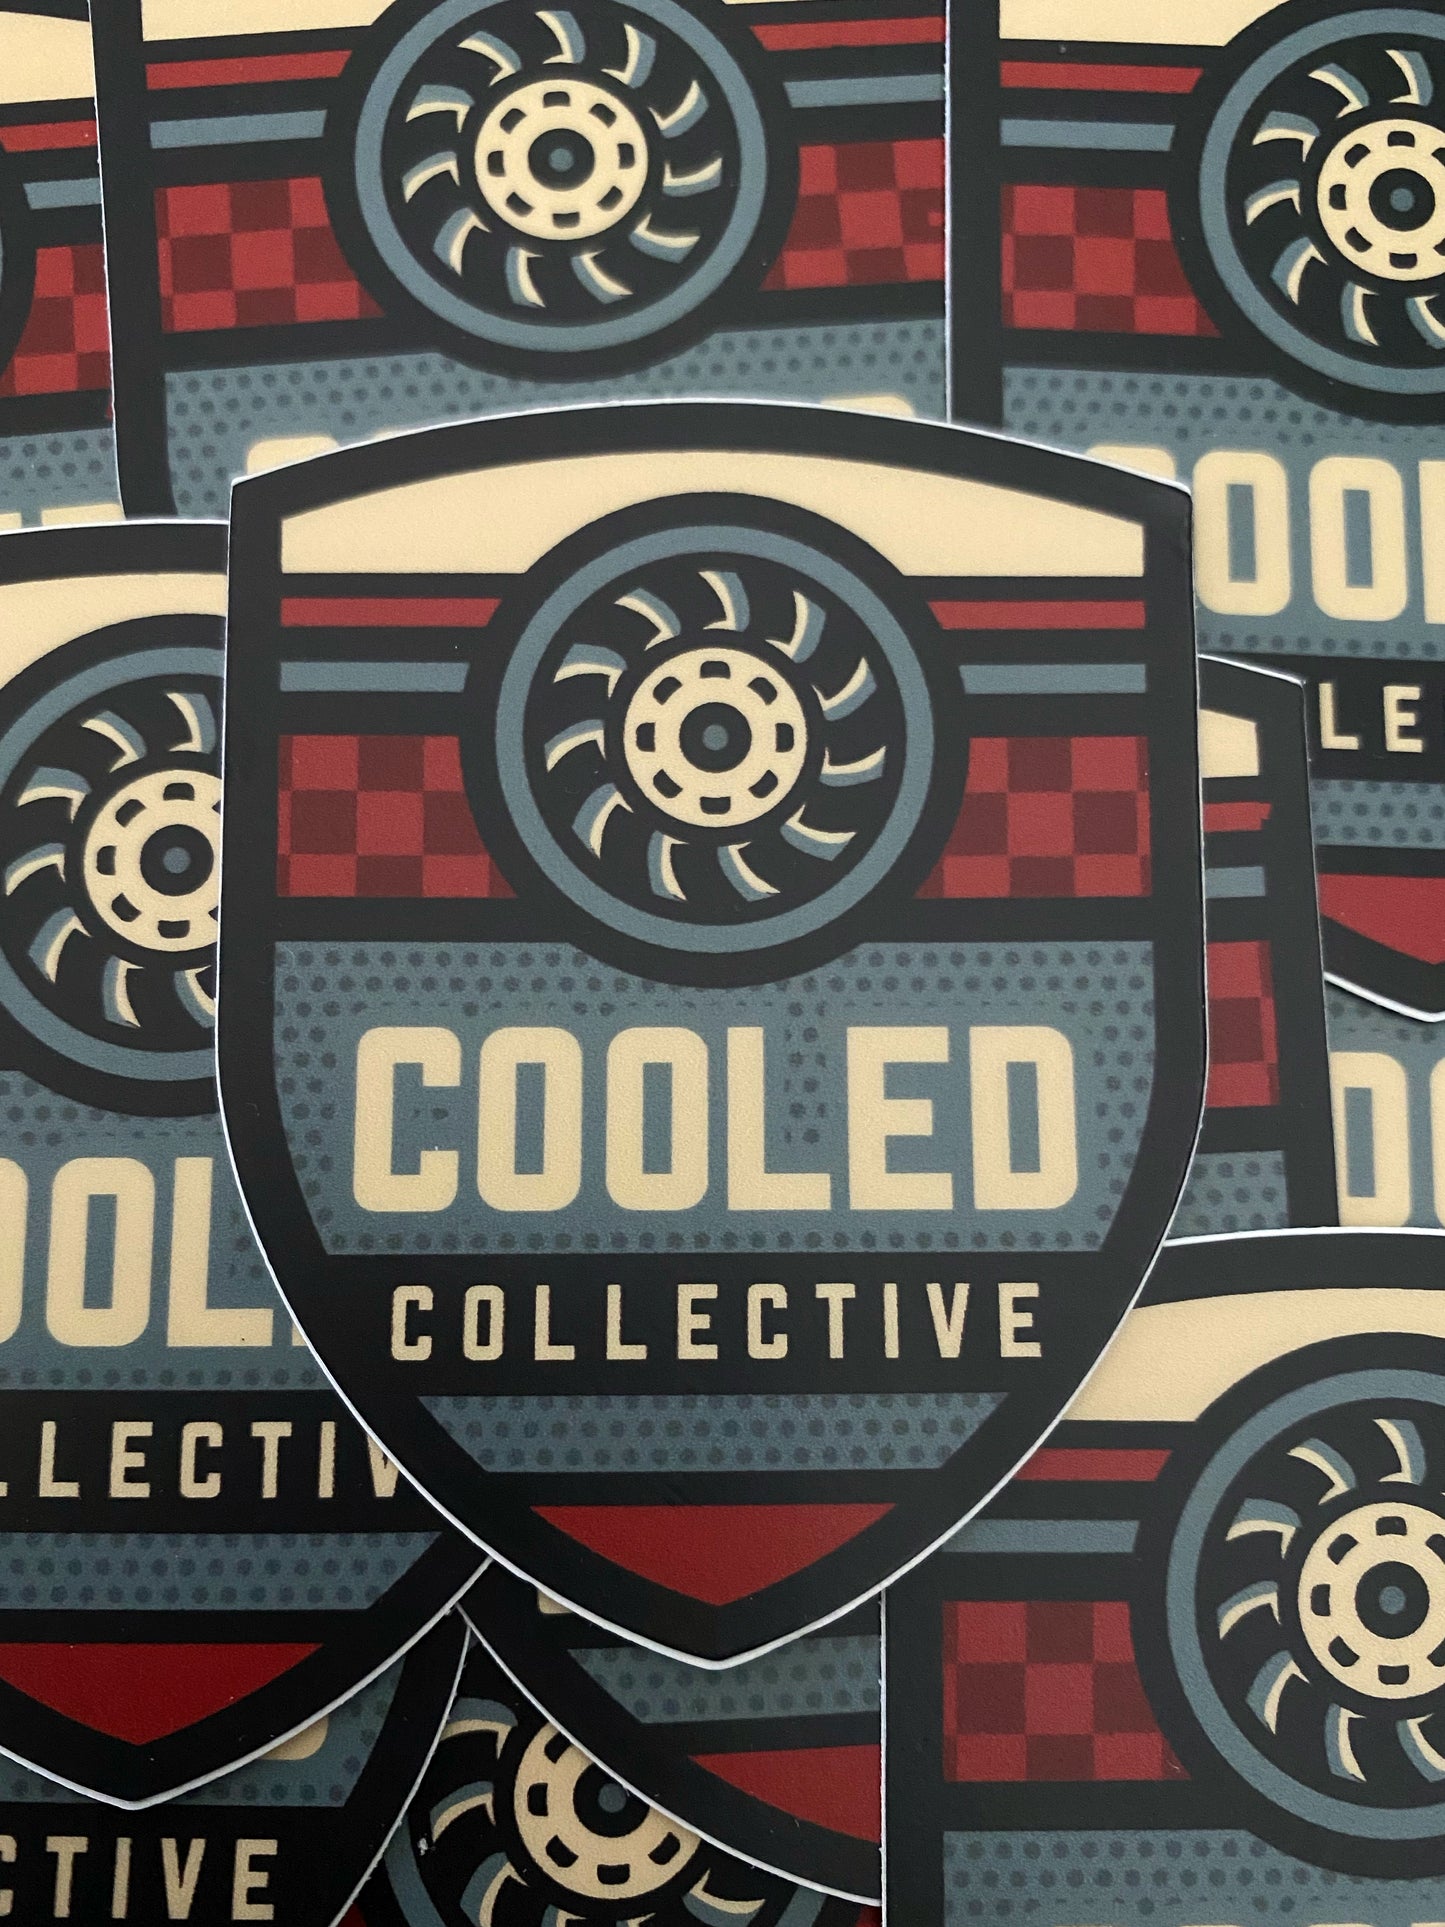 Cooled Collective Aircooled Shield Decal